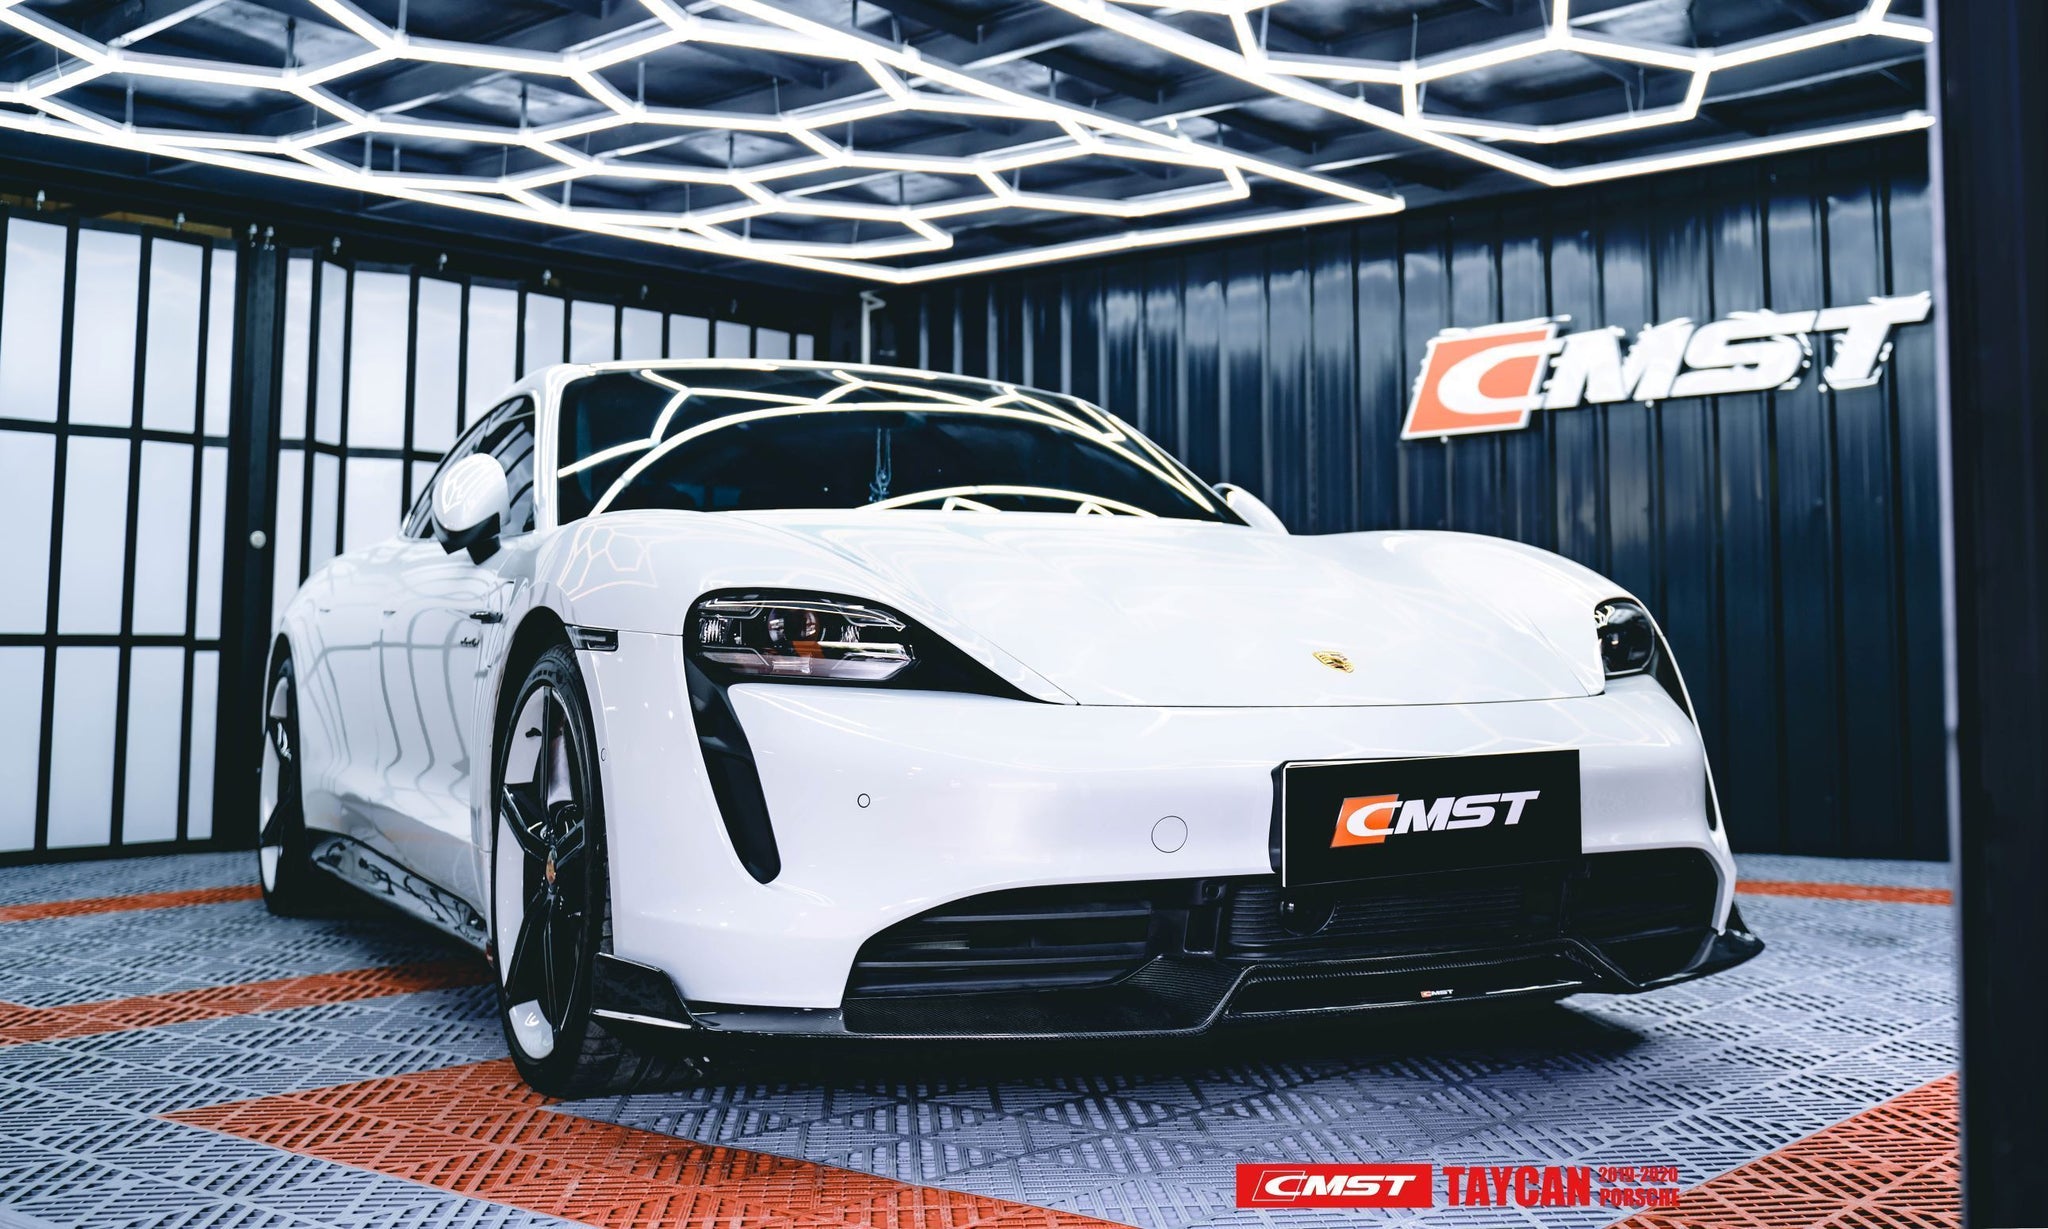 Check our price and buy CMST Carbon Fiber Body Kit set Style for Porsche Taycan Turbo & Turbo S